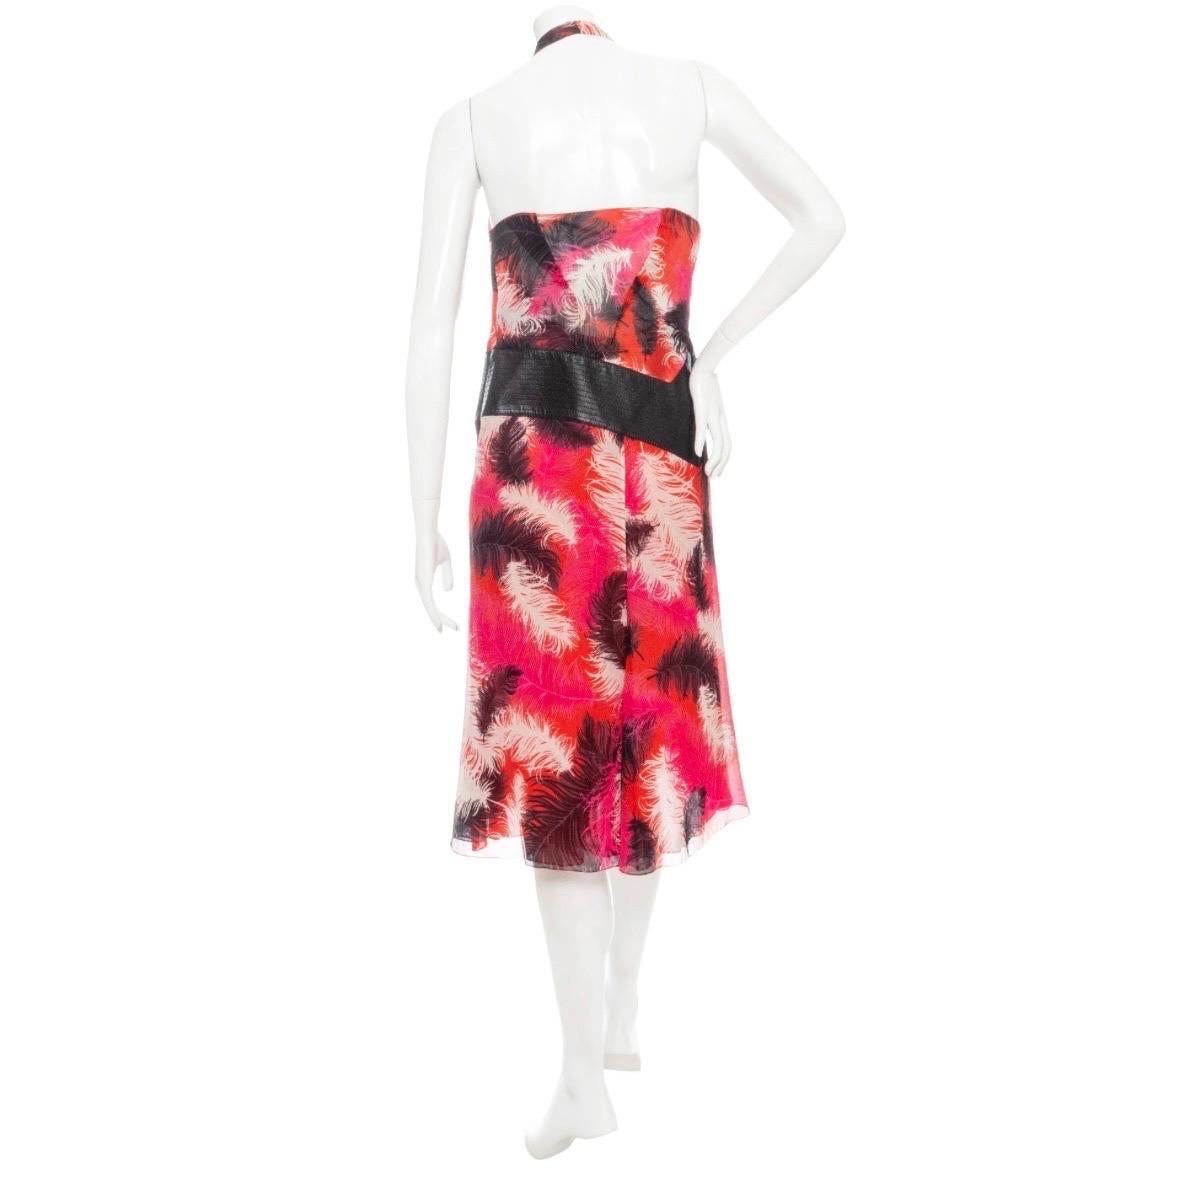 Gianni Versace 2001 Pink Silk-Blend Feather Print Halter Dress In Good Condition For Sale In Los Angeles, CA